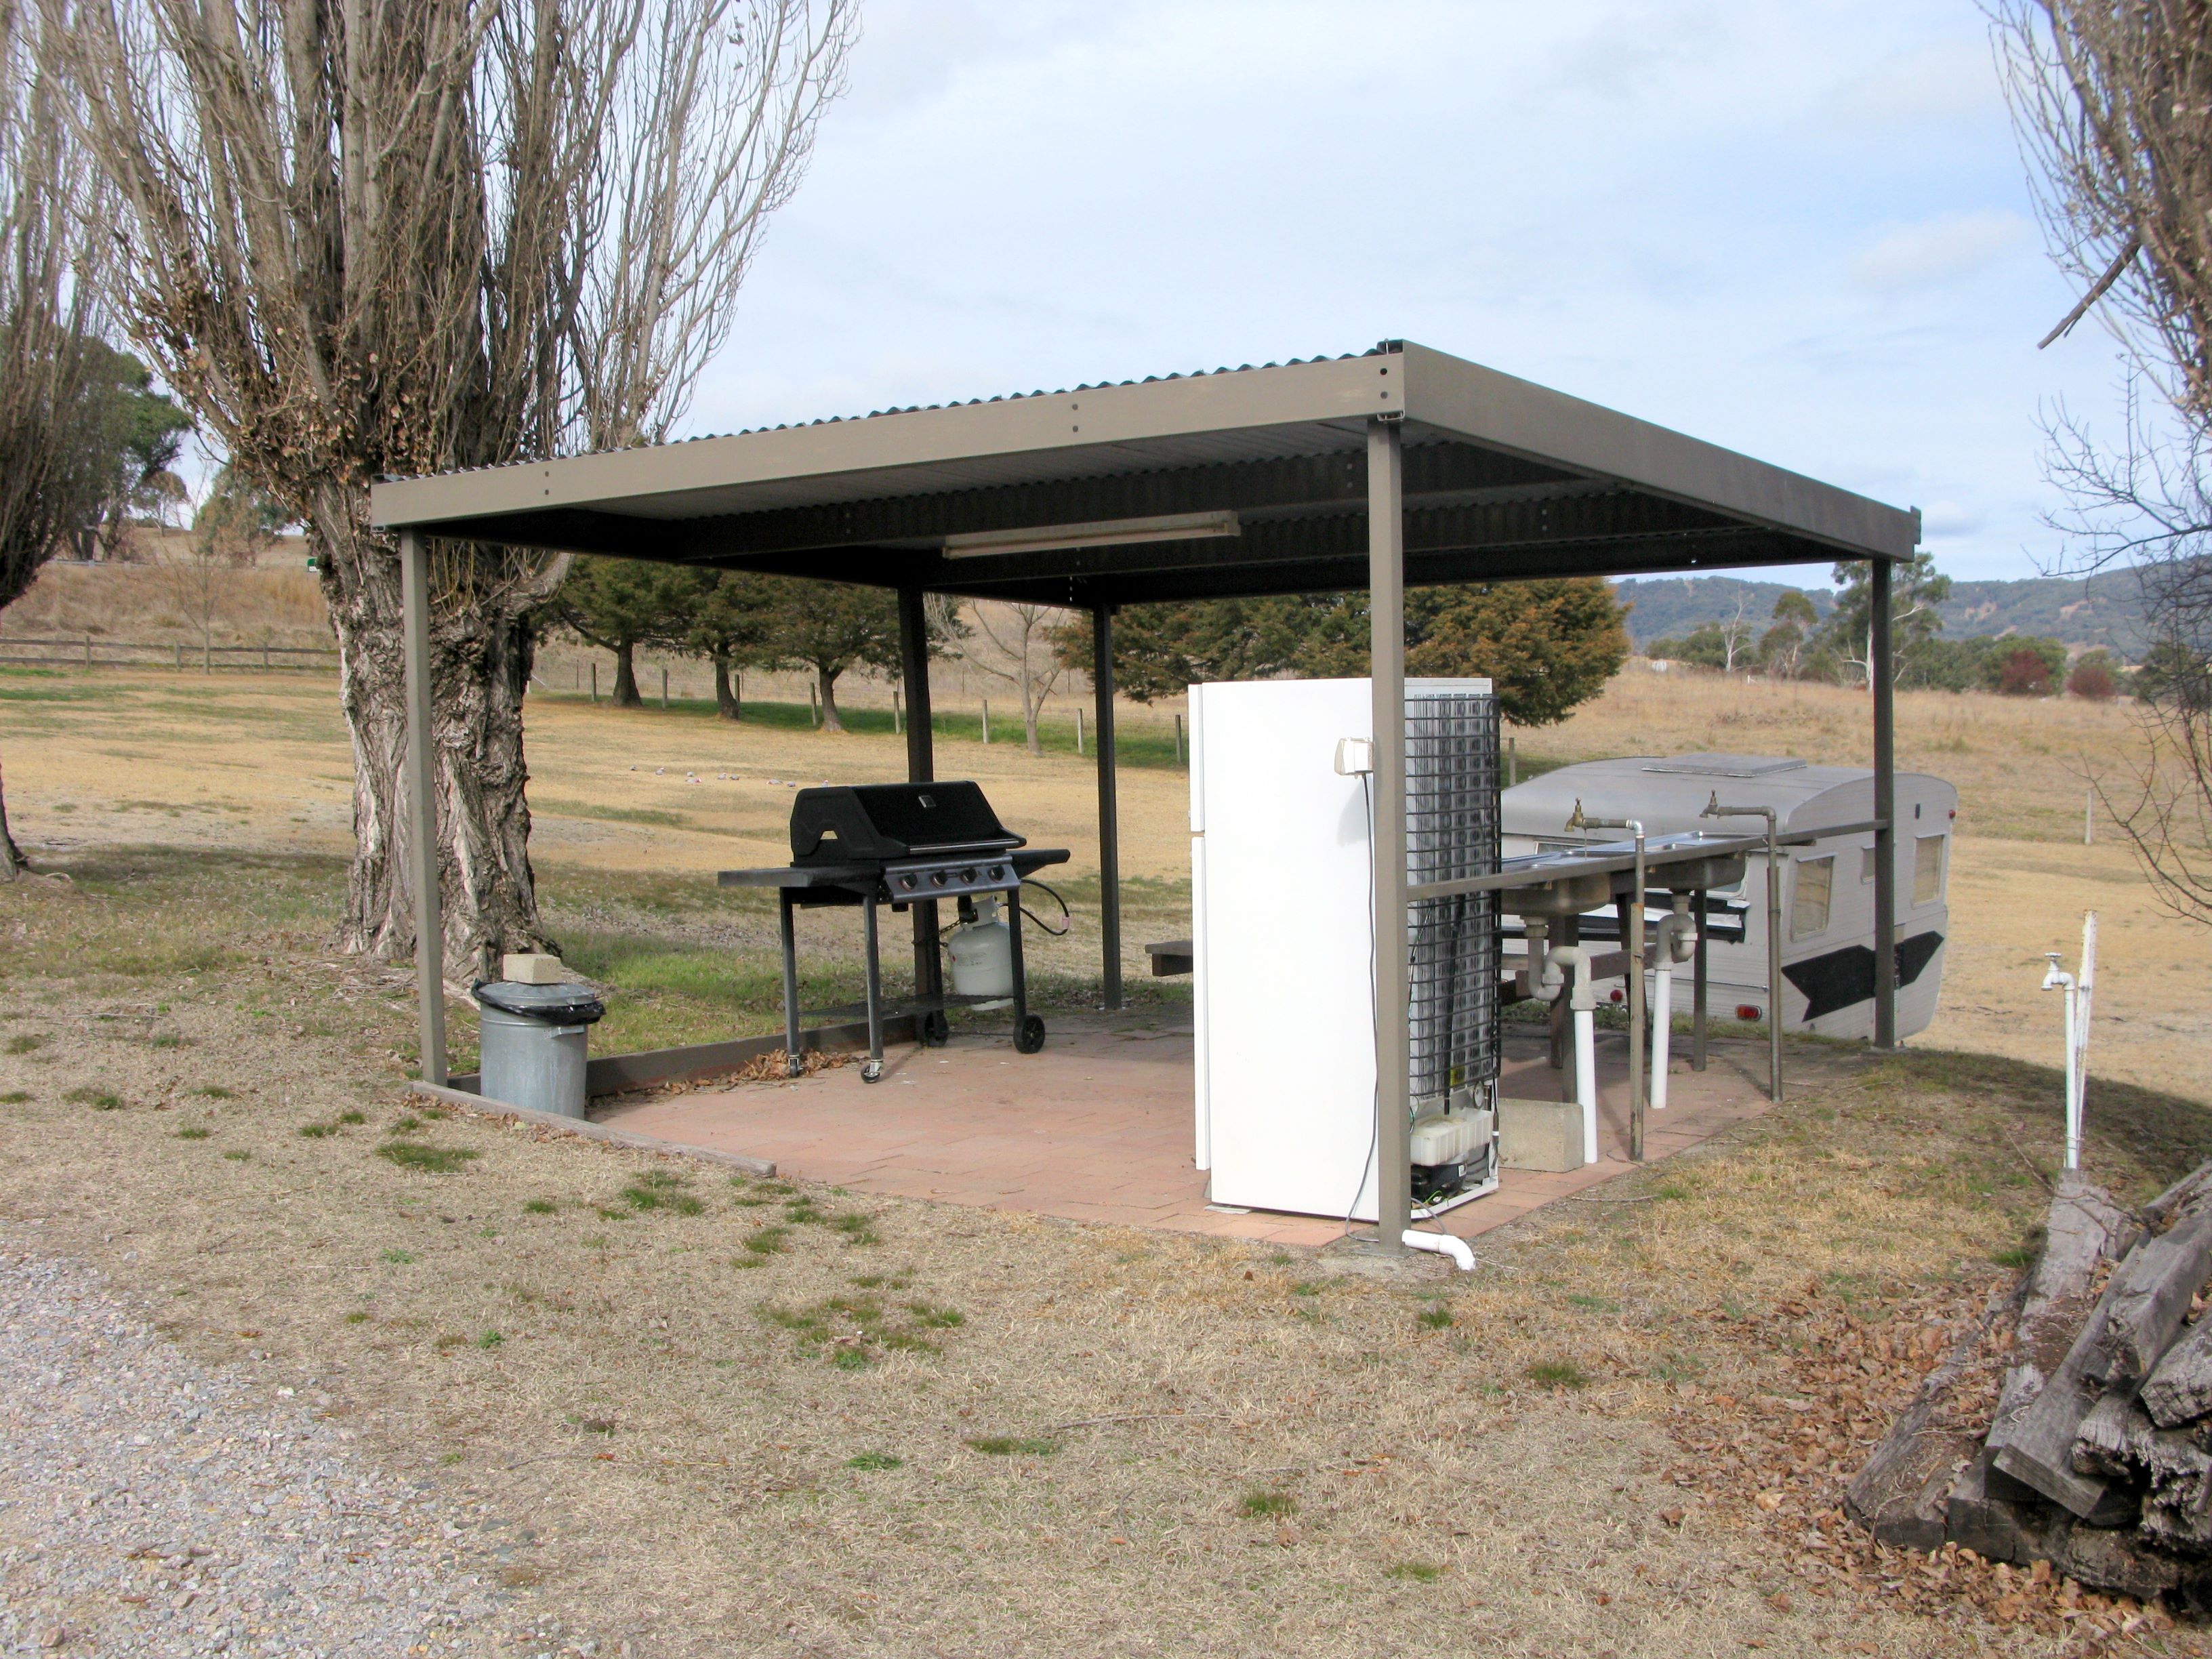 Bendemeer Tourist Park - Bendemeer: Camp kitchen and BBQ area